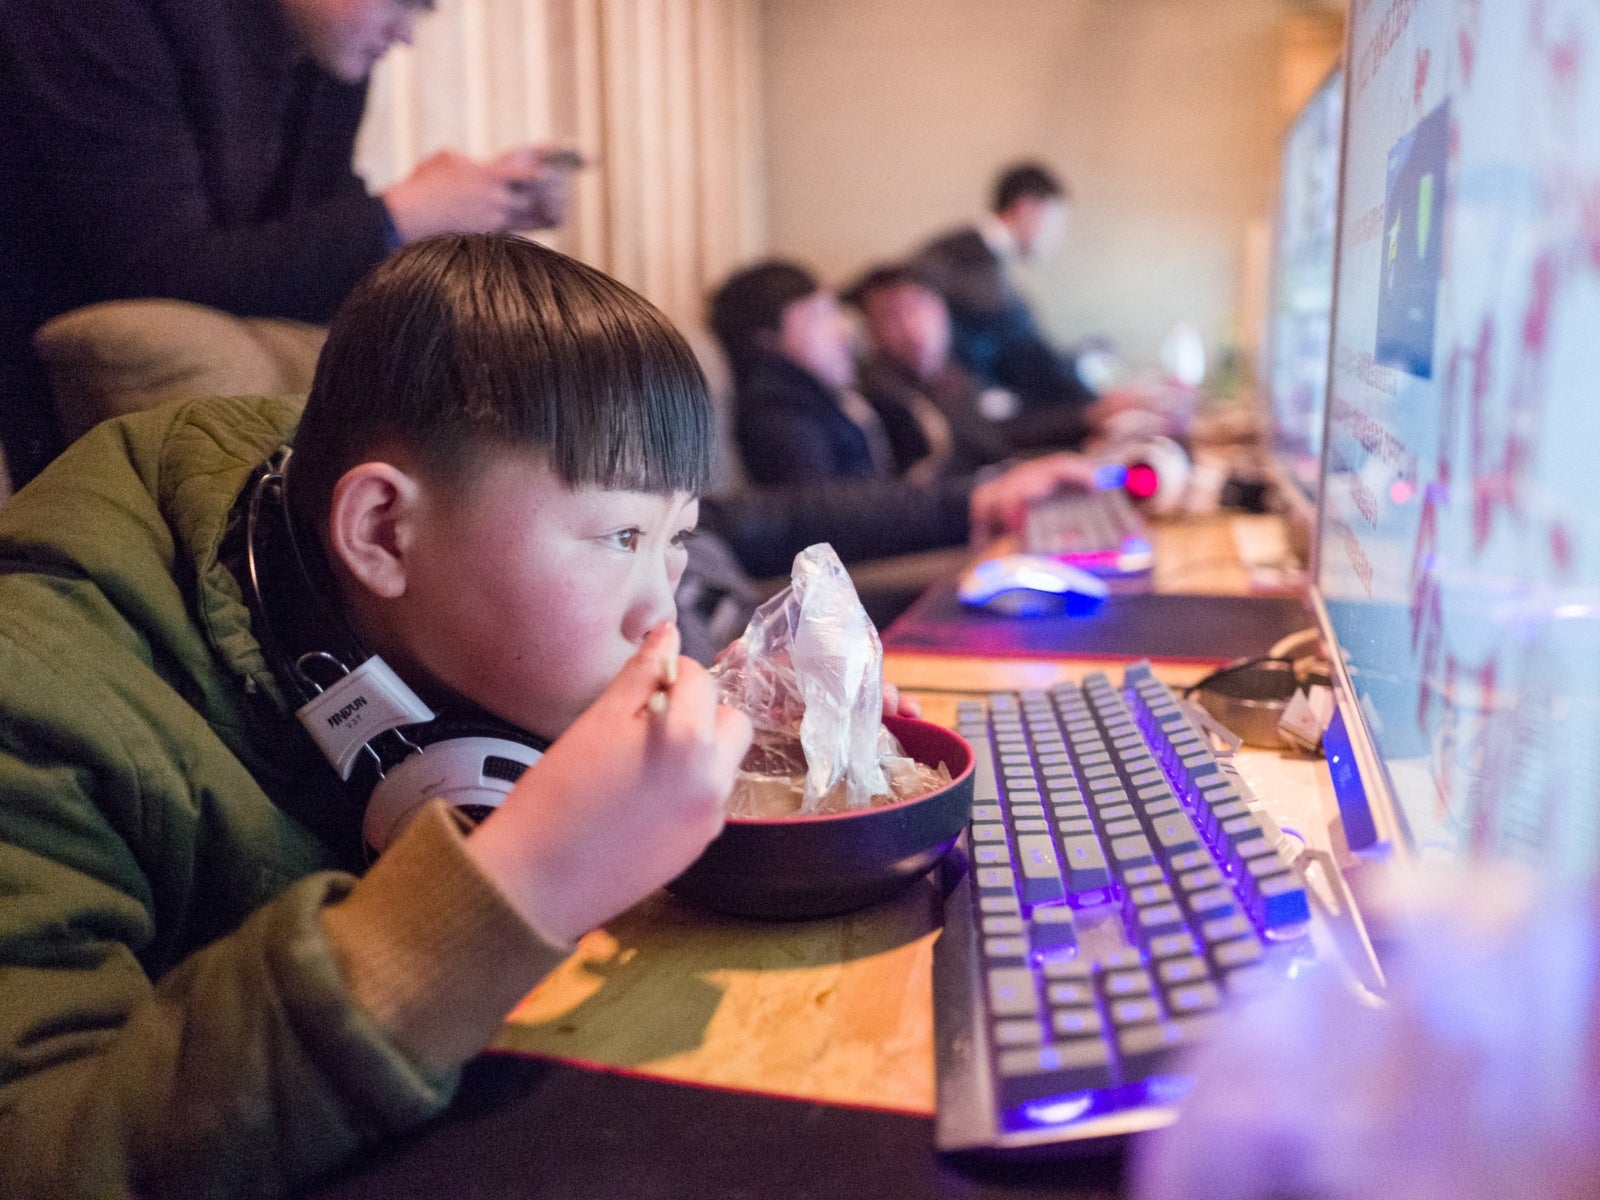 China Govt Bans Kids Under 18 From Playing Video Games For More Than 90 Mins &Amp; After 10Pm - World Of Buzz